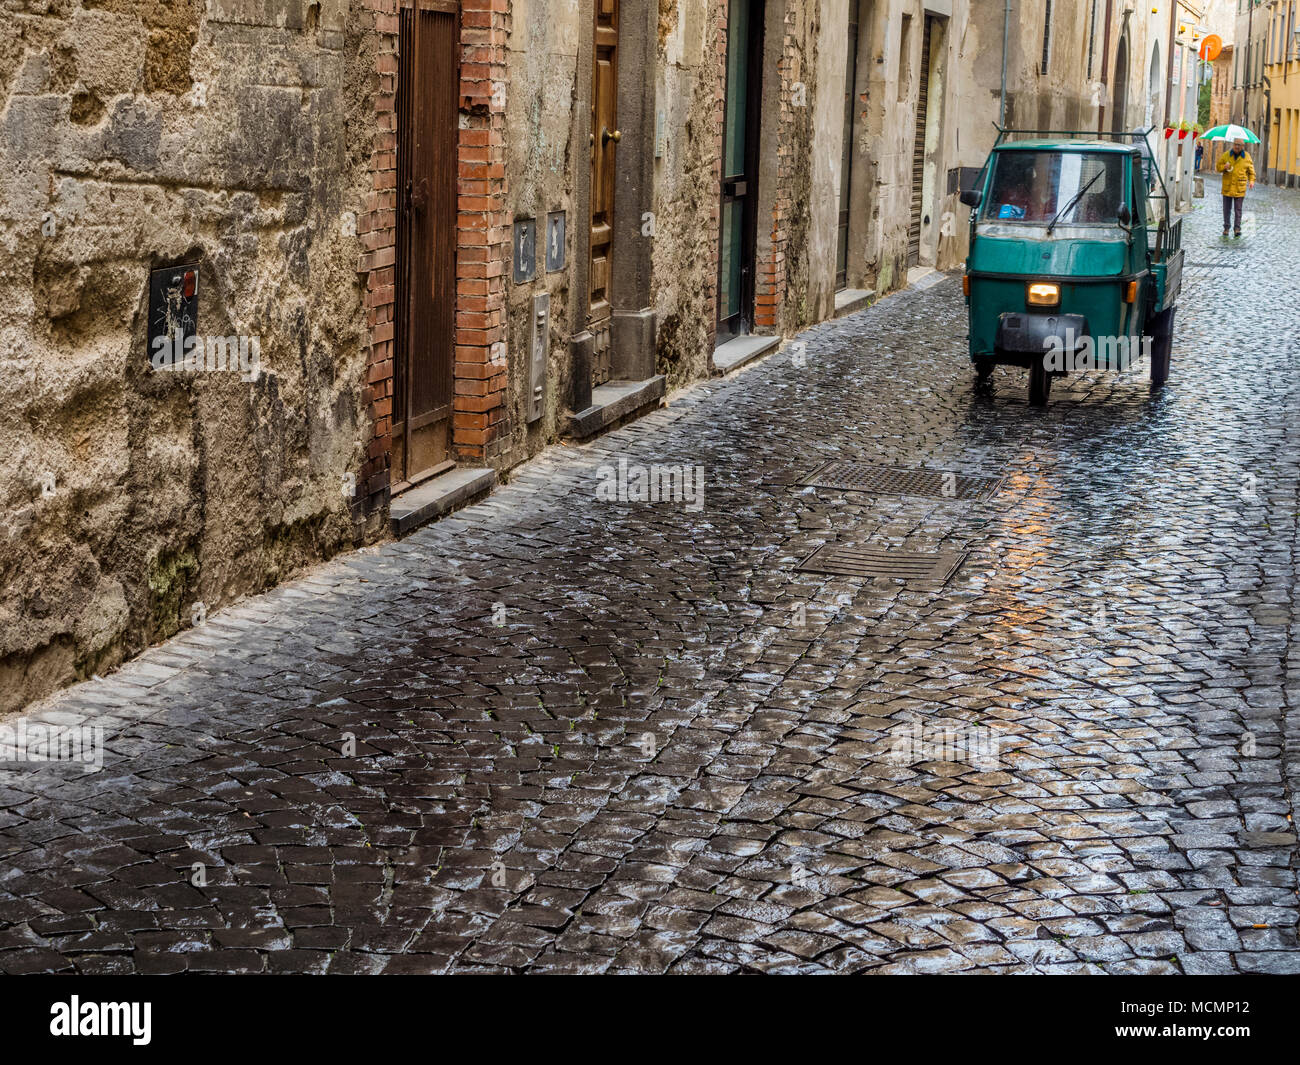 Ape in the town of Orvieto in Umbria, Italy Stock Photo